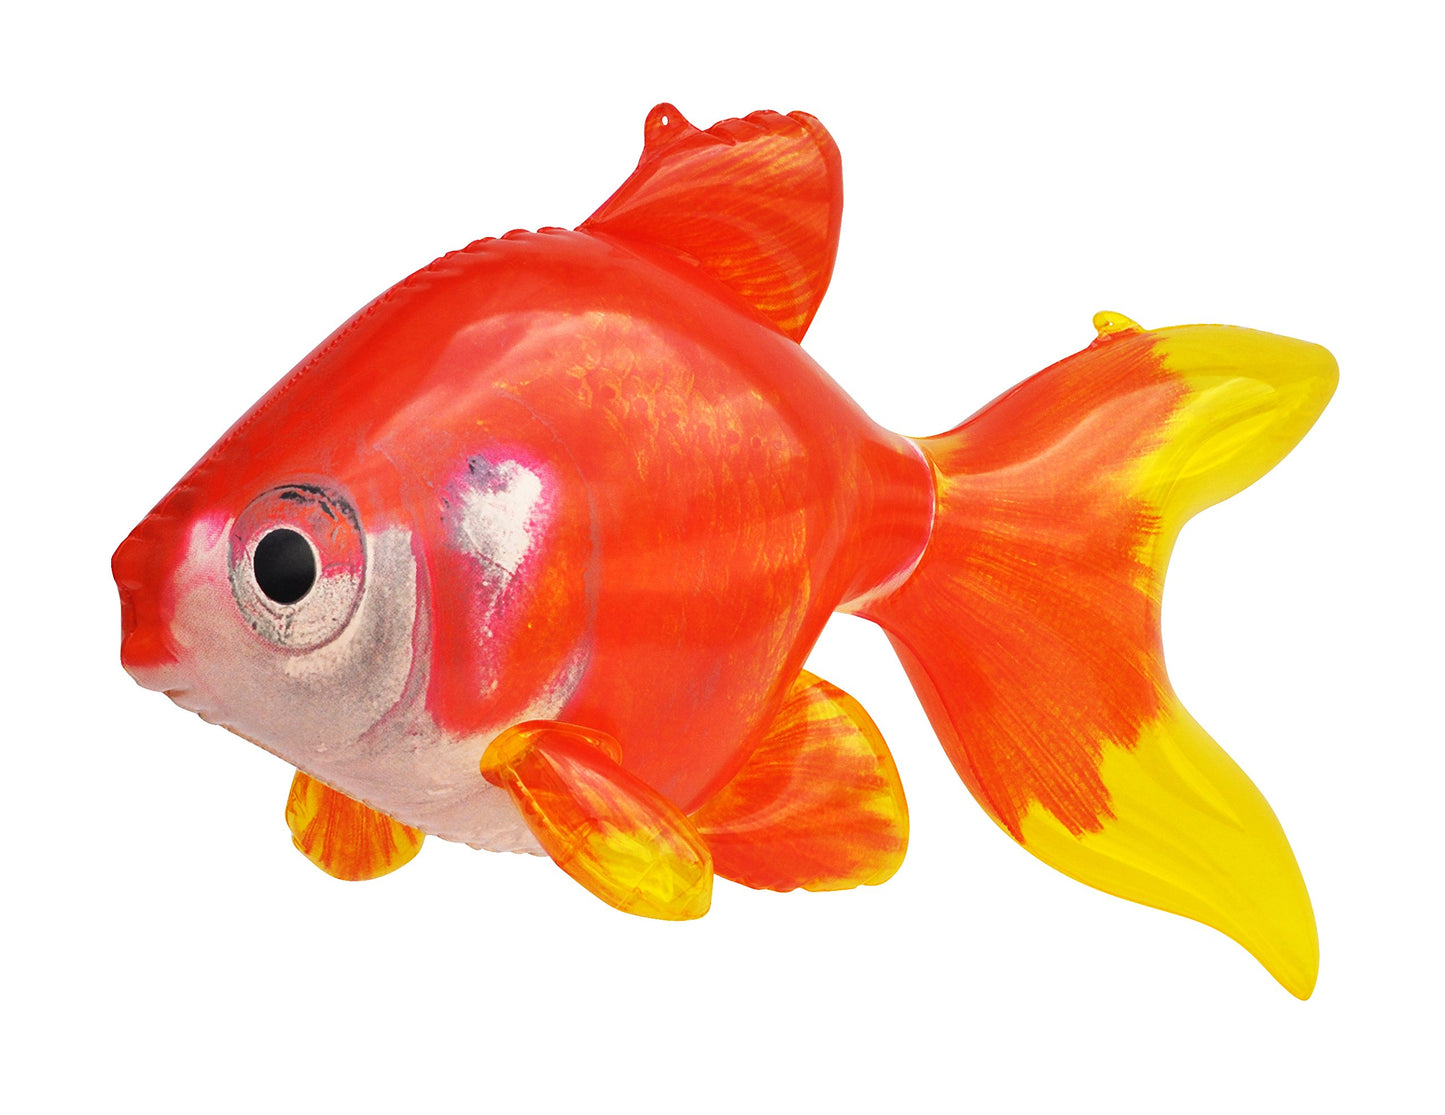 Jet Creations Inflatable 20 inch Long Pack of 4 Gold Fish,Party Supplies Party Favors,partygifts an-GOLD4, Multi GOLDFISH